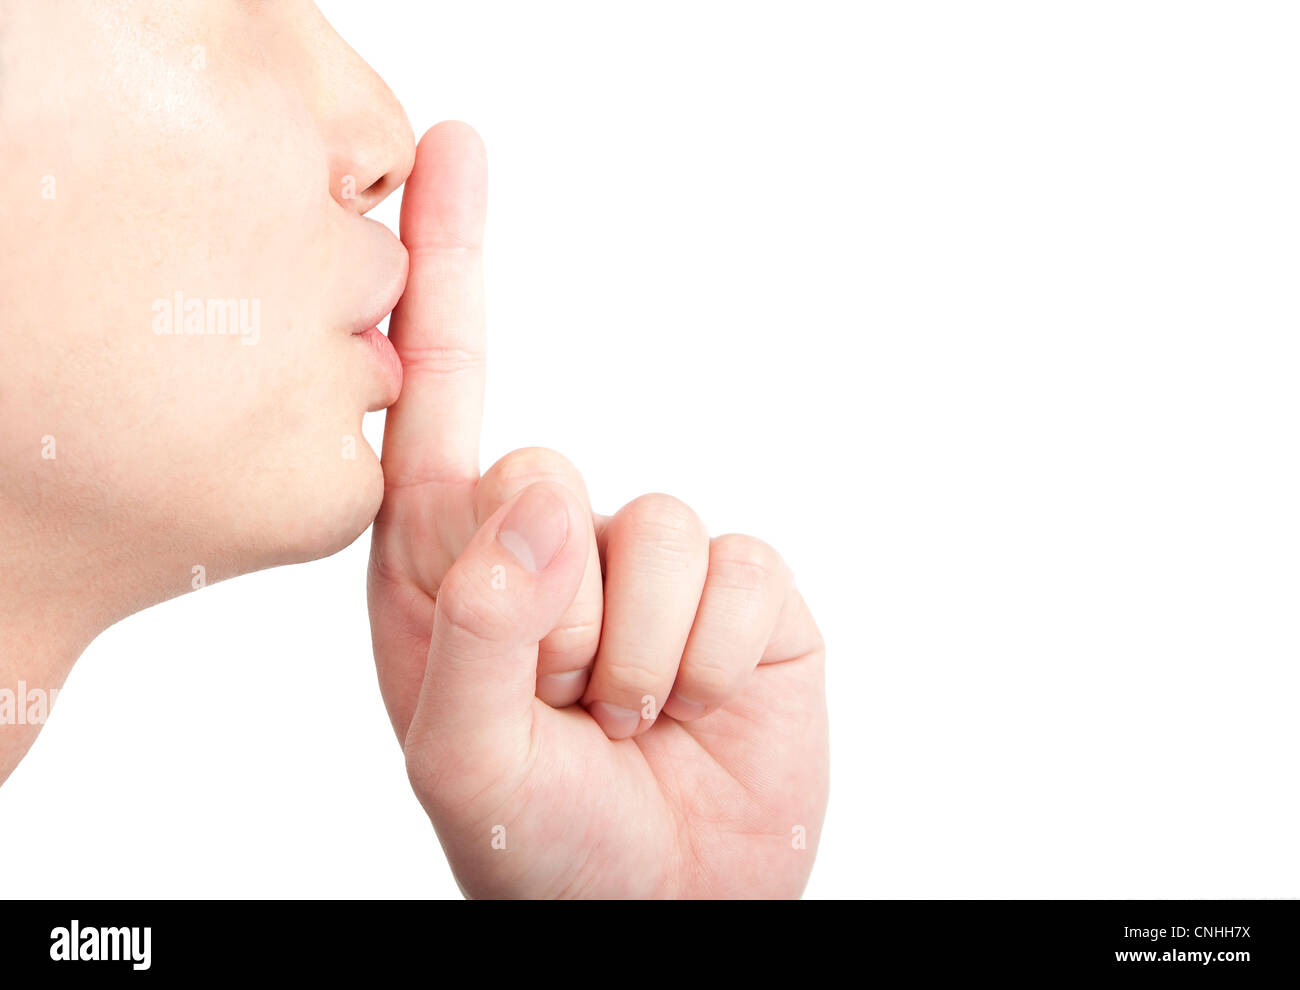 Young man asking for silence Stock Photo